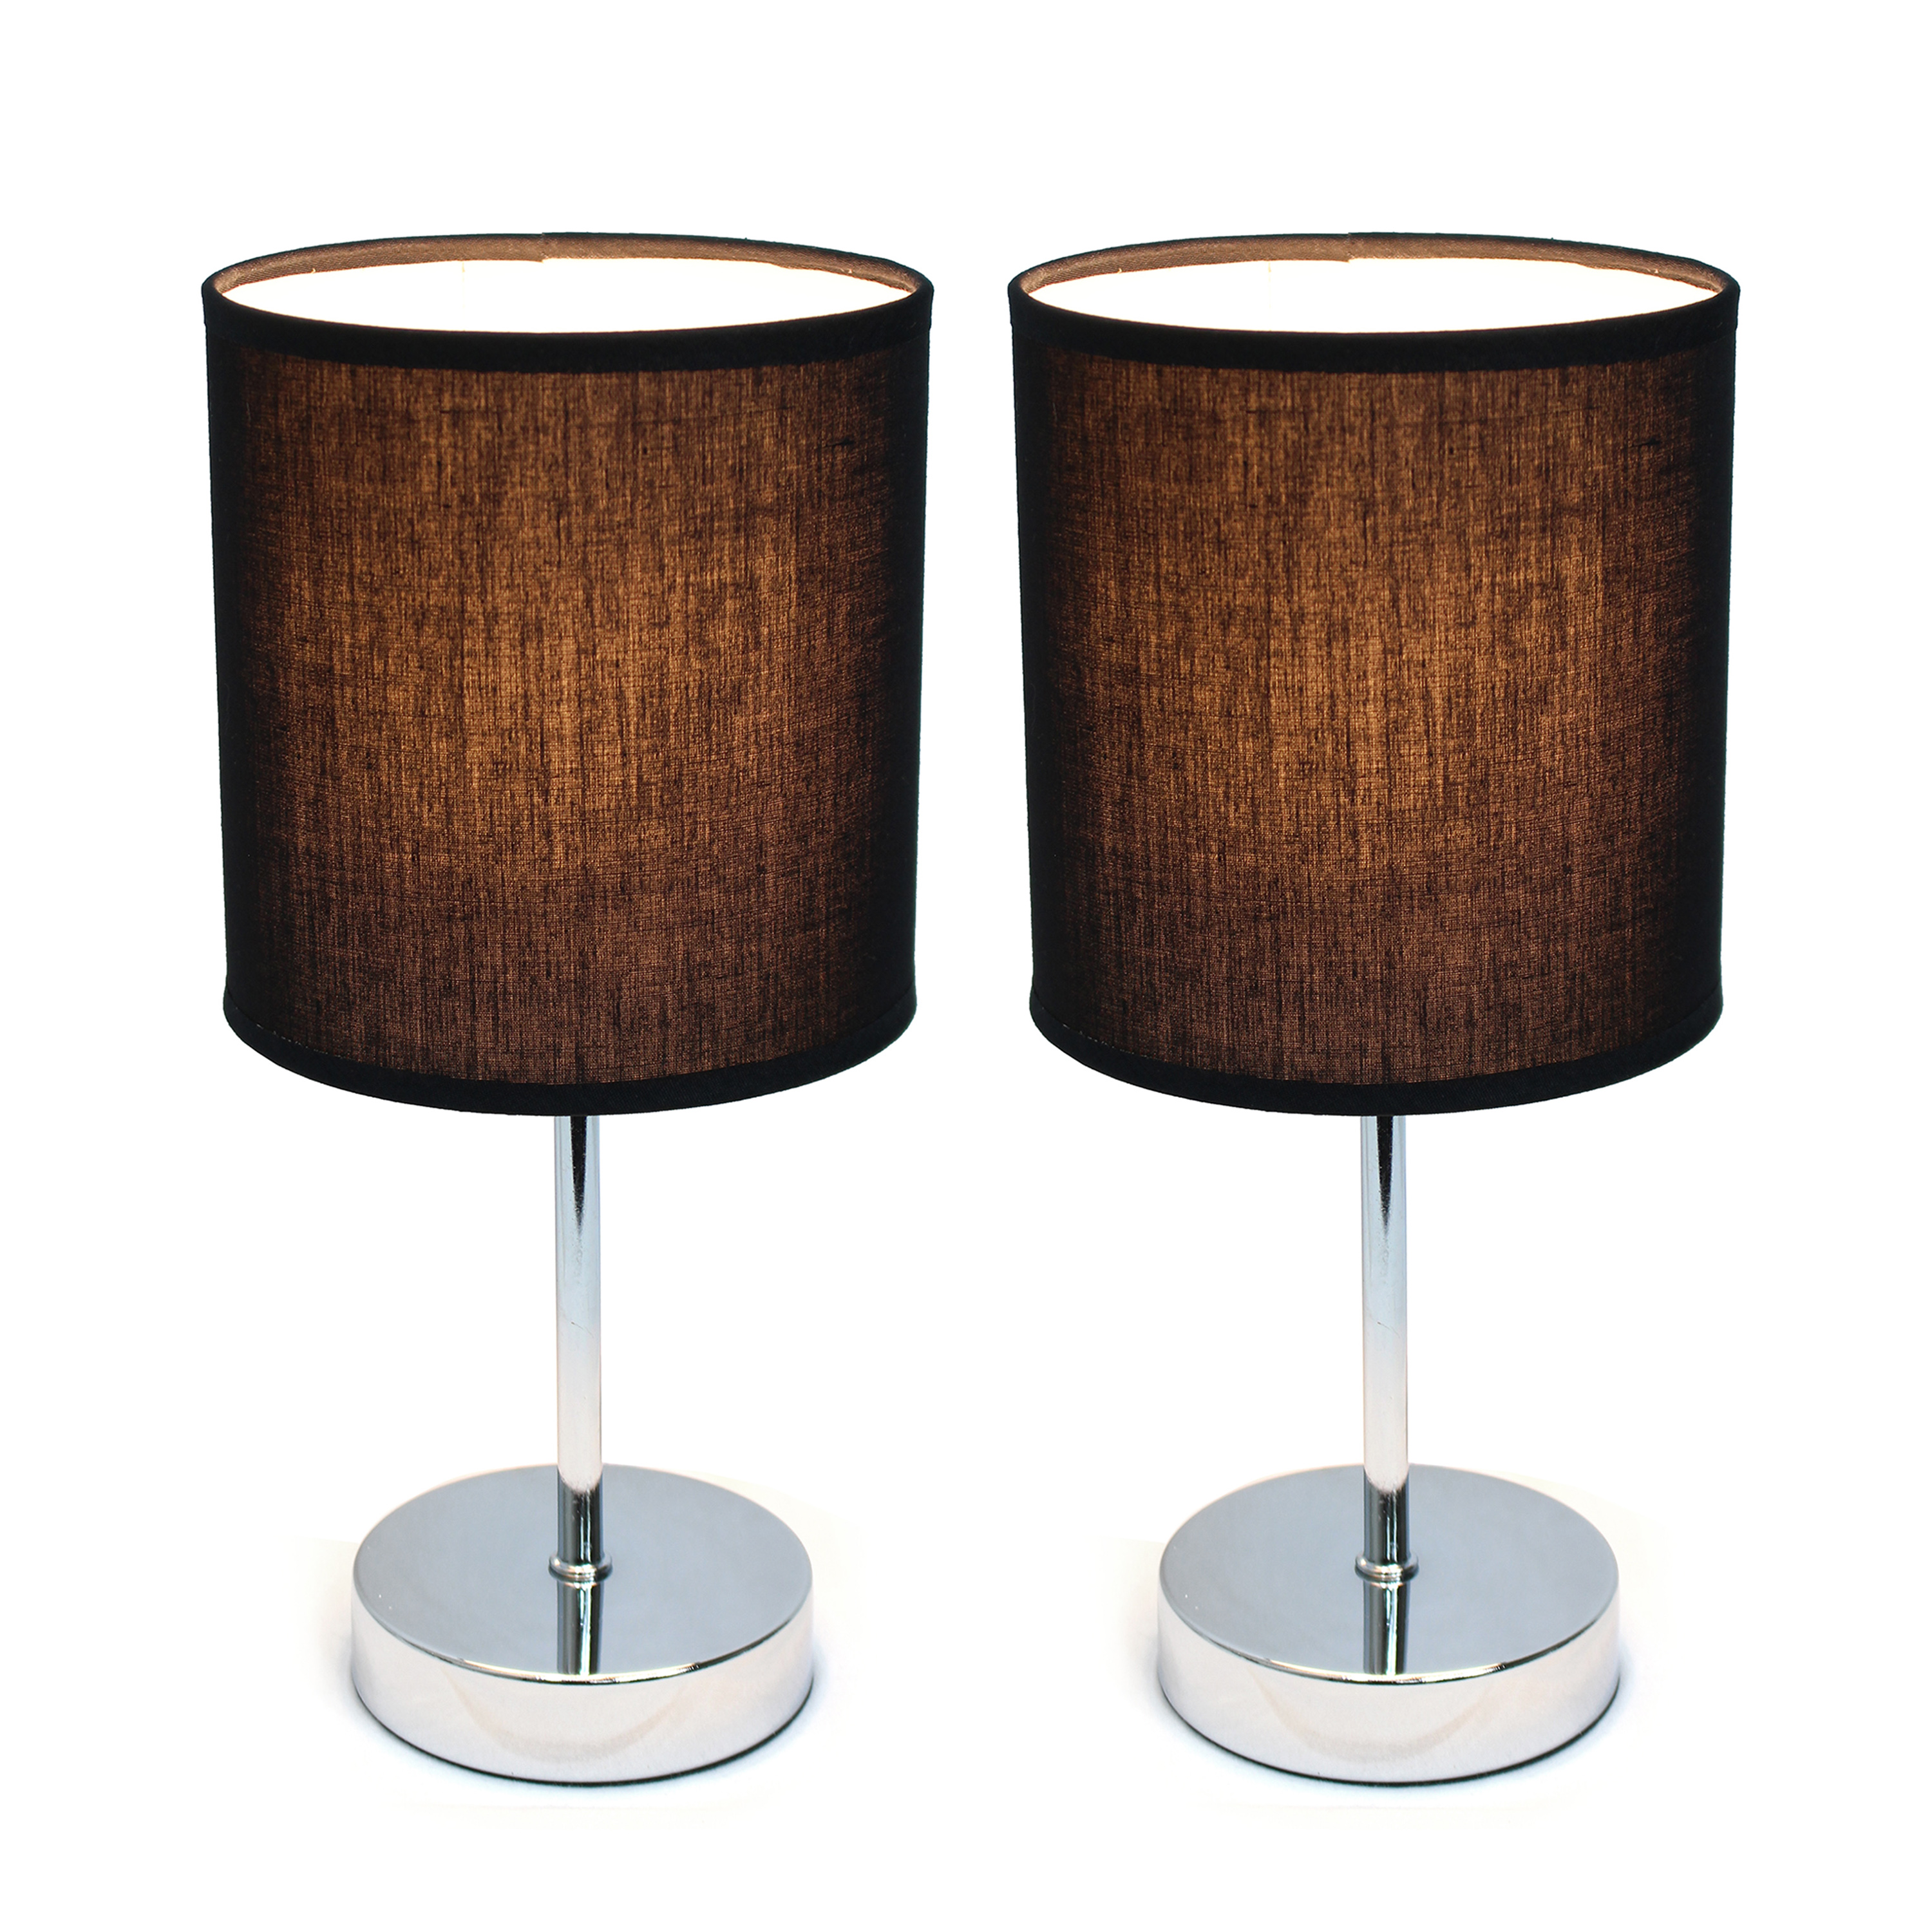 Simple Designs 11.81" 2-Pack Basic Chrome Mini Table Lamp Set with Fabric Shades, Black - image 2 of 6